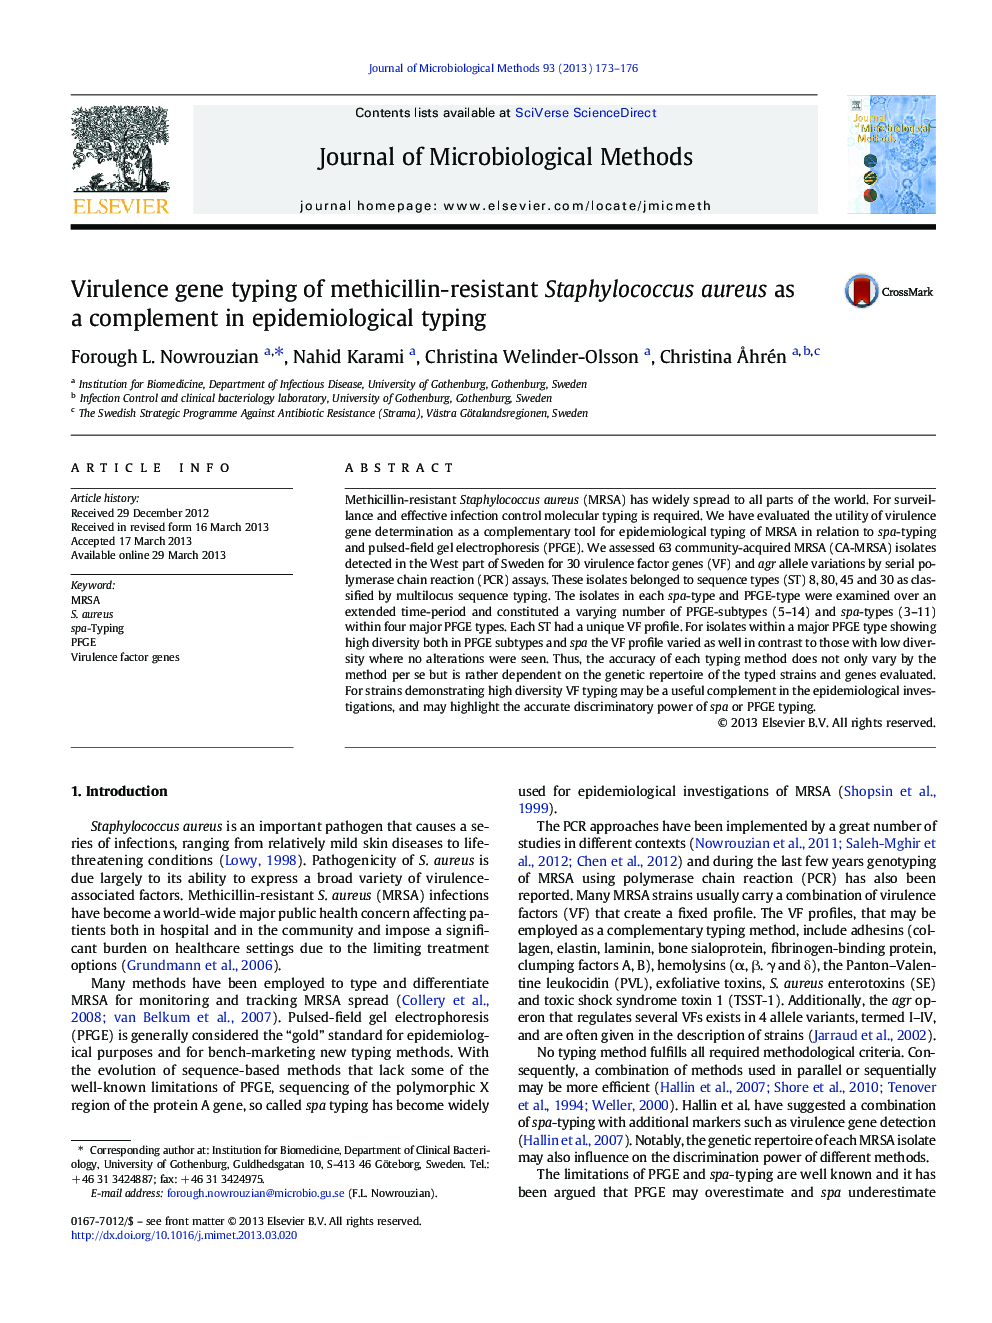 Virulence gene typing of methicillin-resistant Staphylococcus aureus as a complement in epidemiological typing